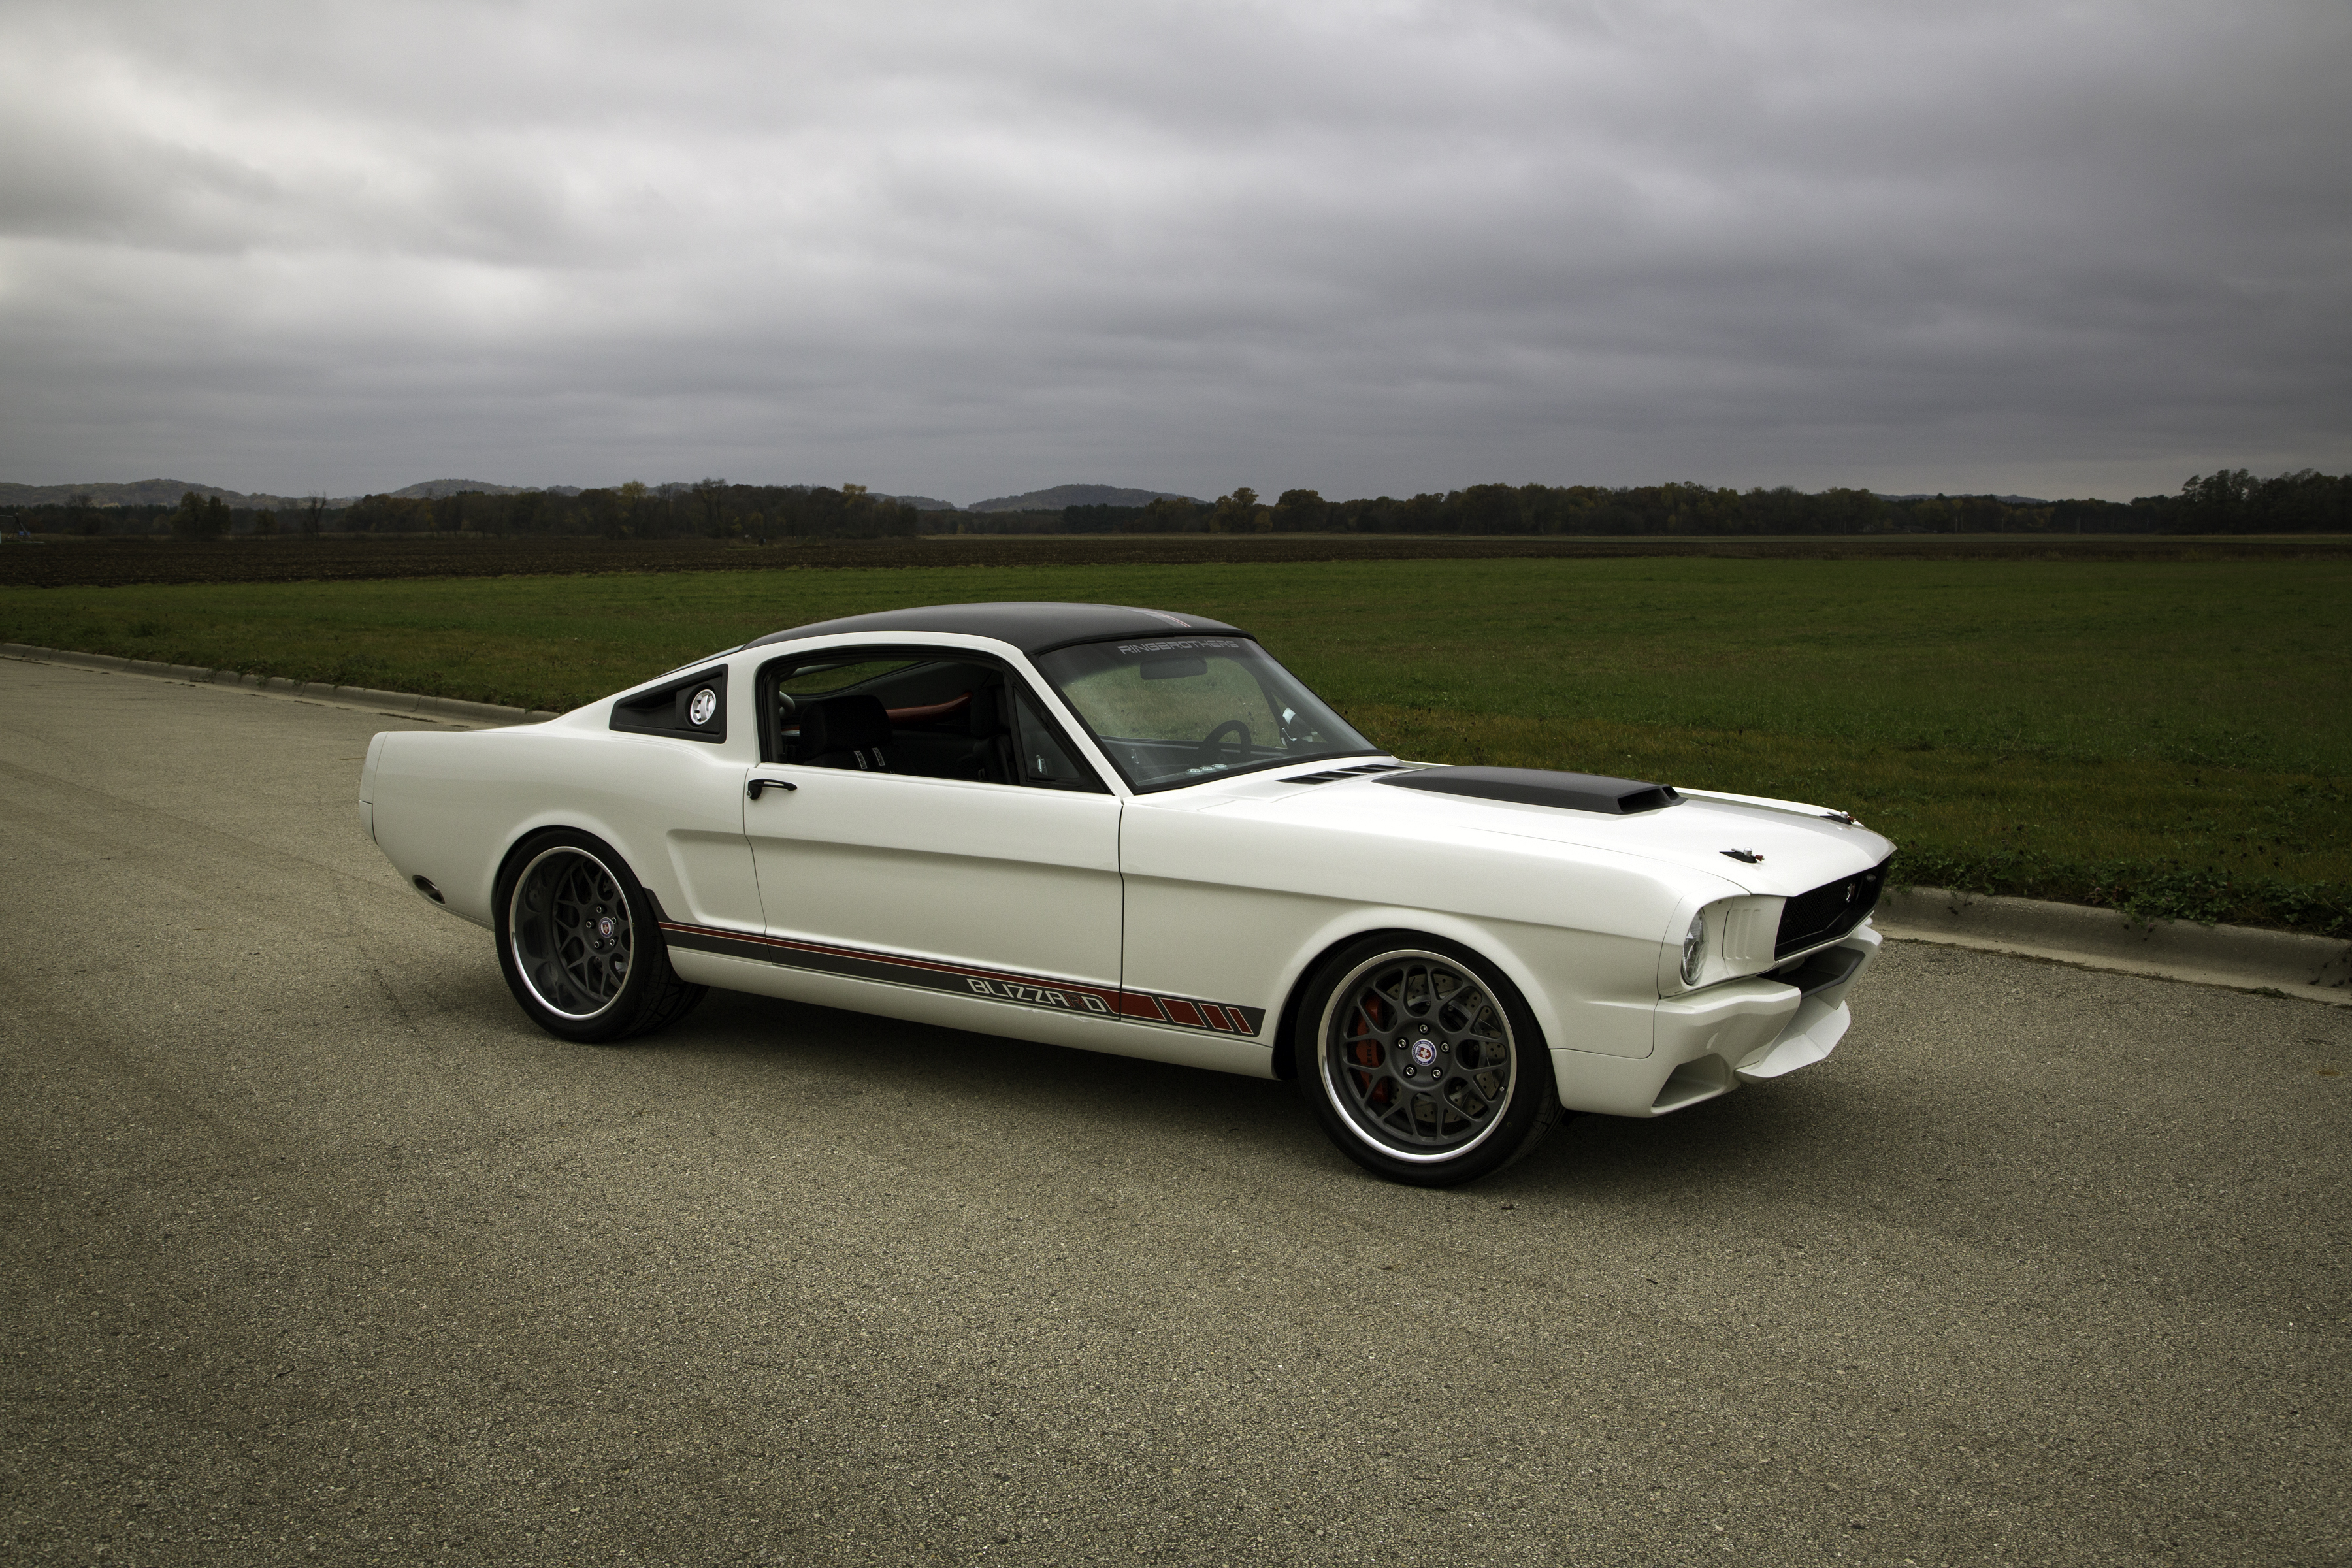 Car Fastback Ford Mustang Blizzard Muscle Car Ringbrothers Tuning White Car 3600x2400